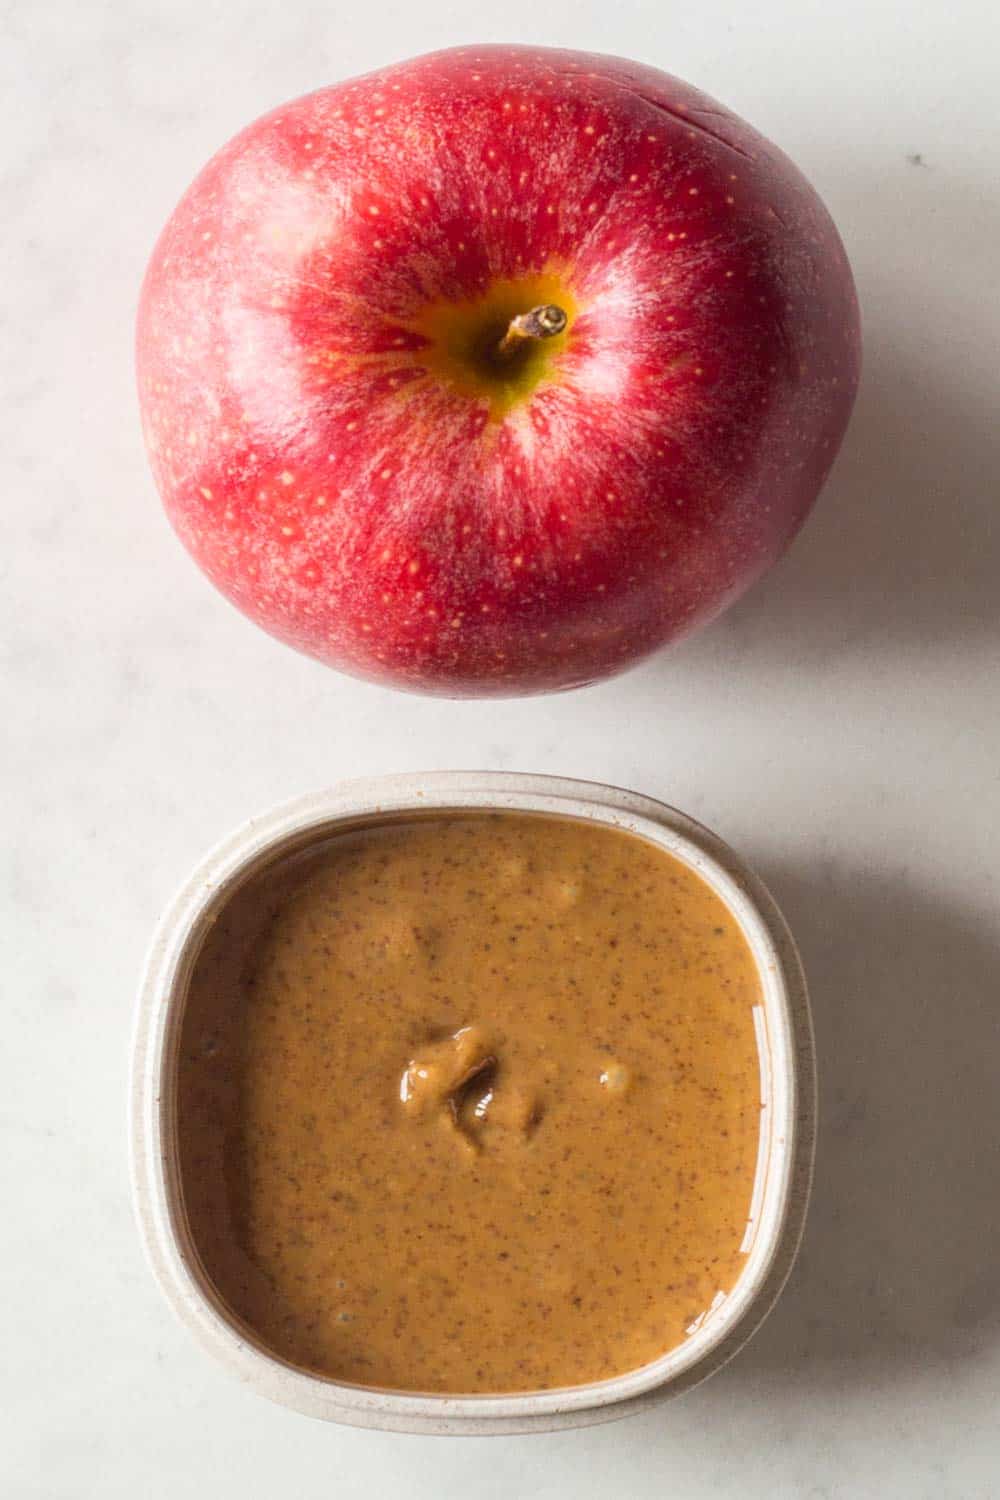 A healthy Paleo Snack for your Paleo Meal Plan - apple slices dipped in almond butter.